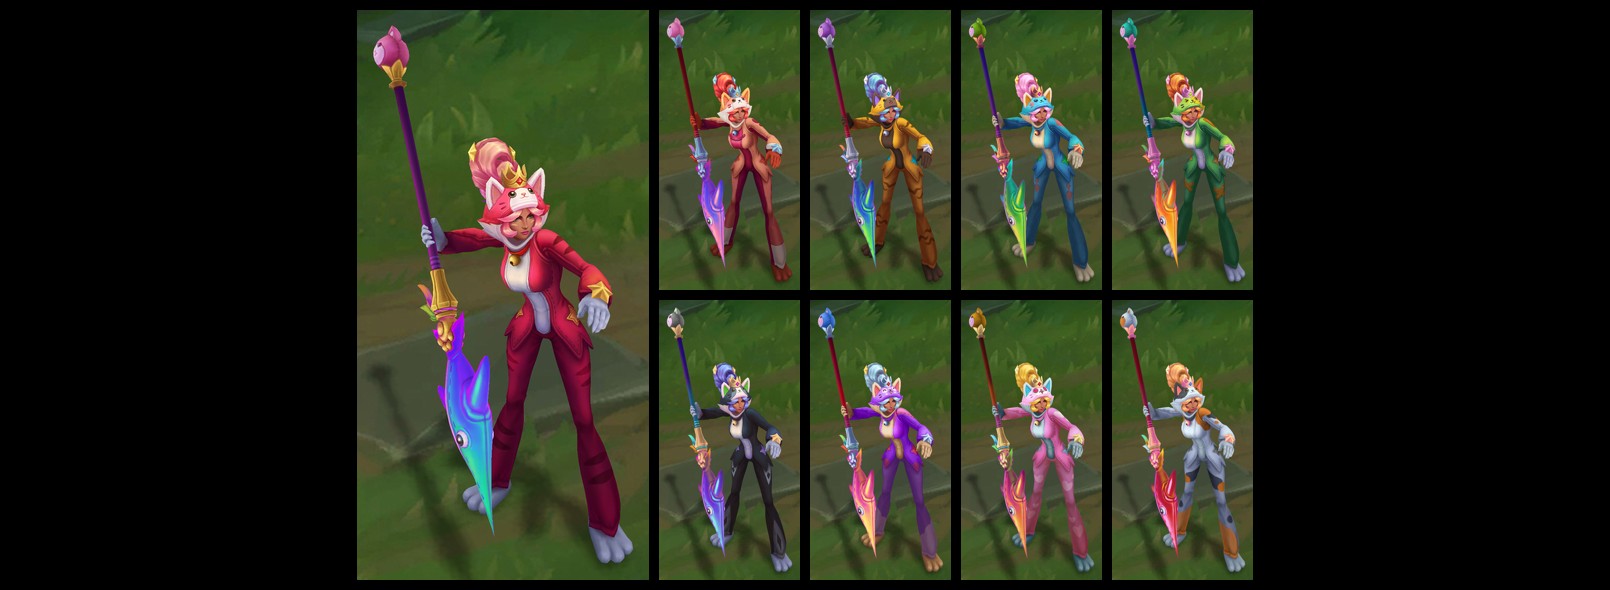 LATEST* LoL 13.7 - Release Date, Patch Notes, Dogs vs. Cats Skins & More